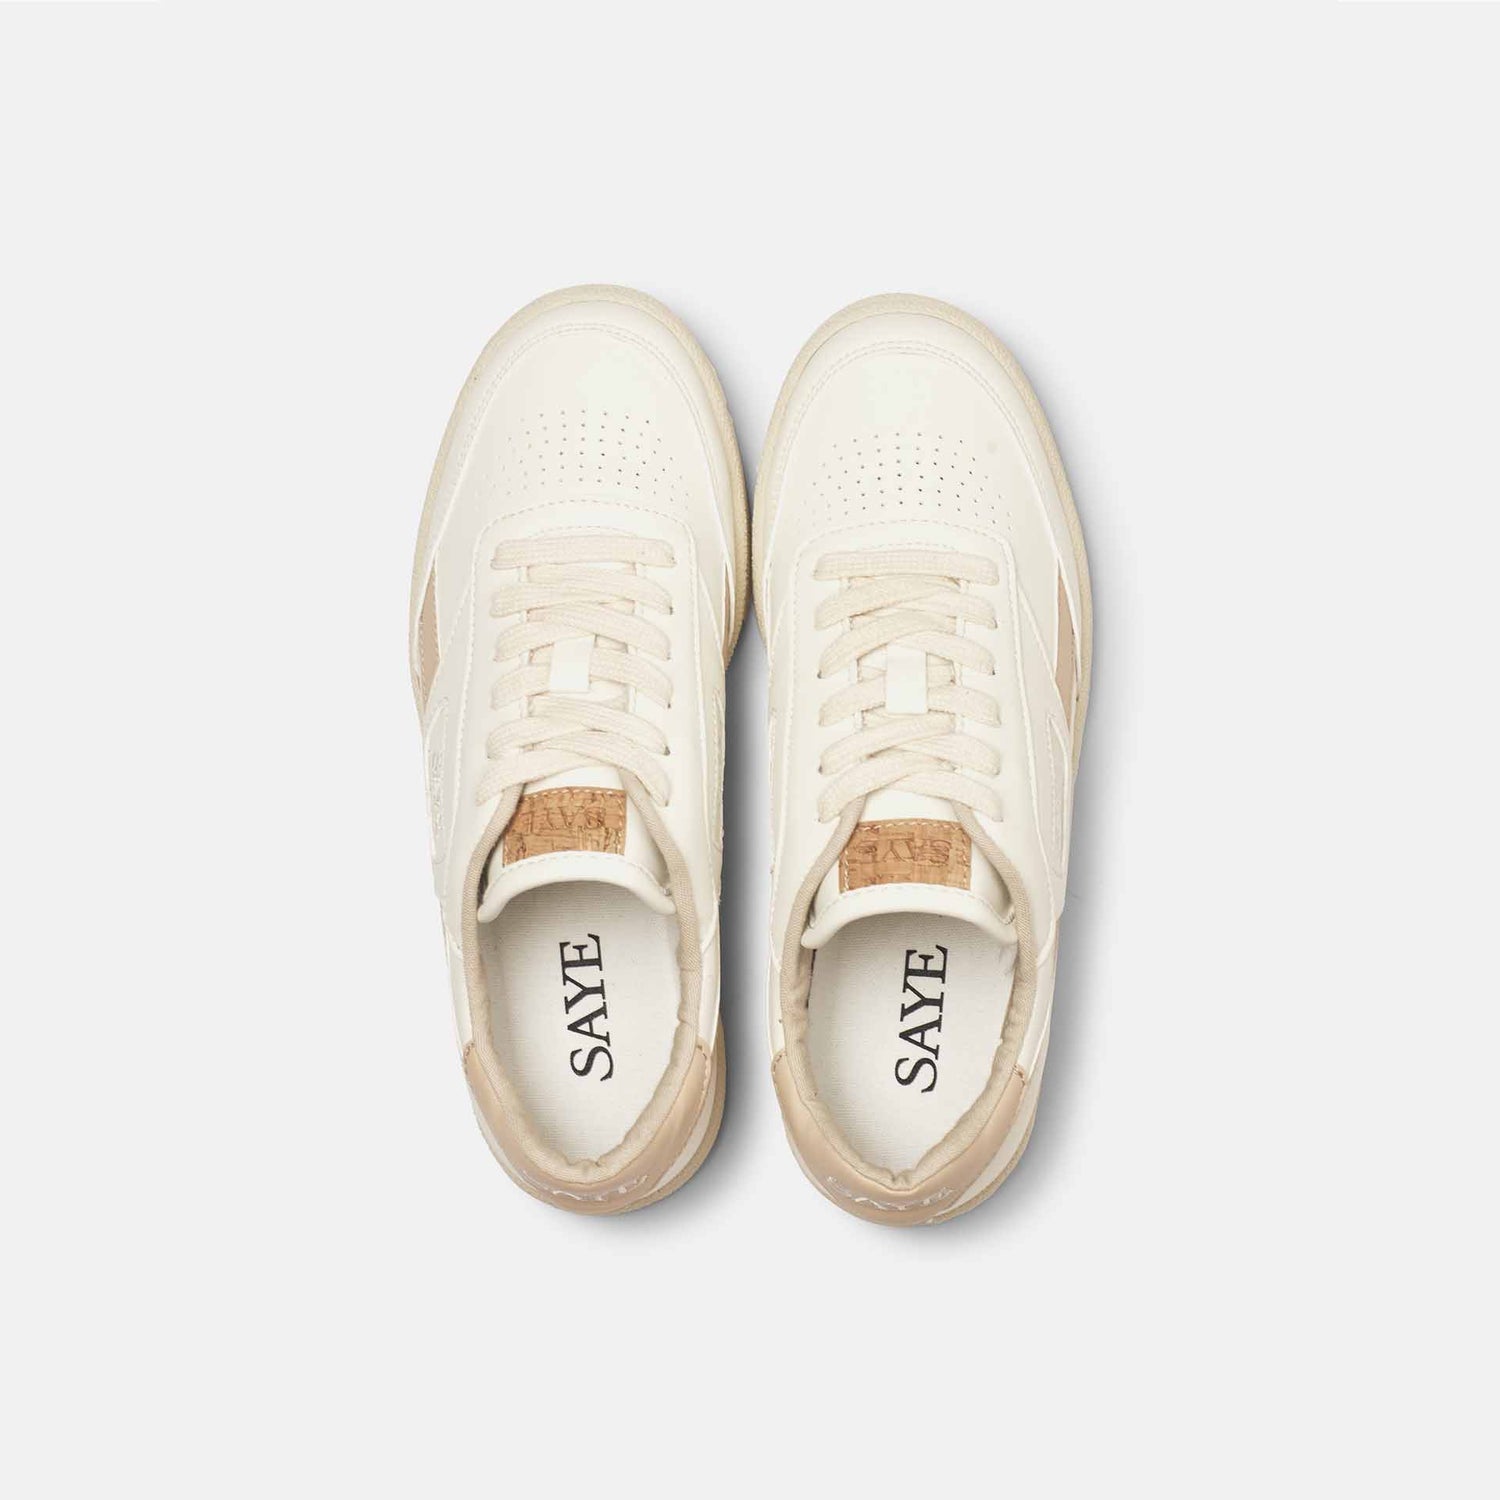 A pair of SAYE Modelo '89 Sneakers - Beige from the '80s, on a white surface.